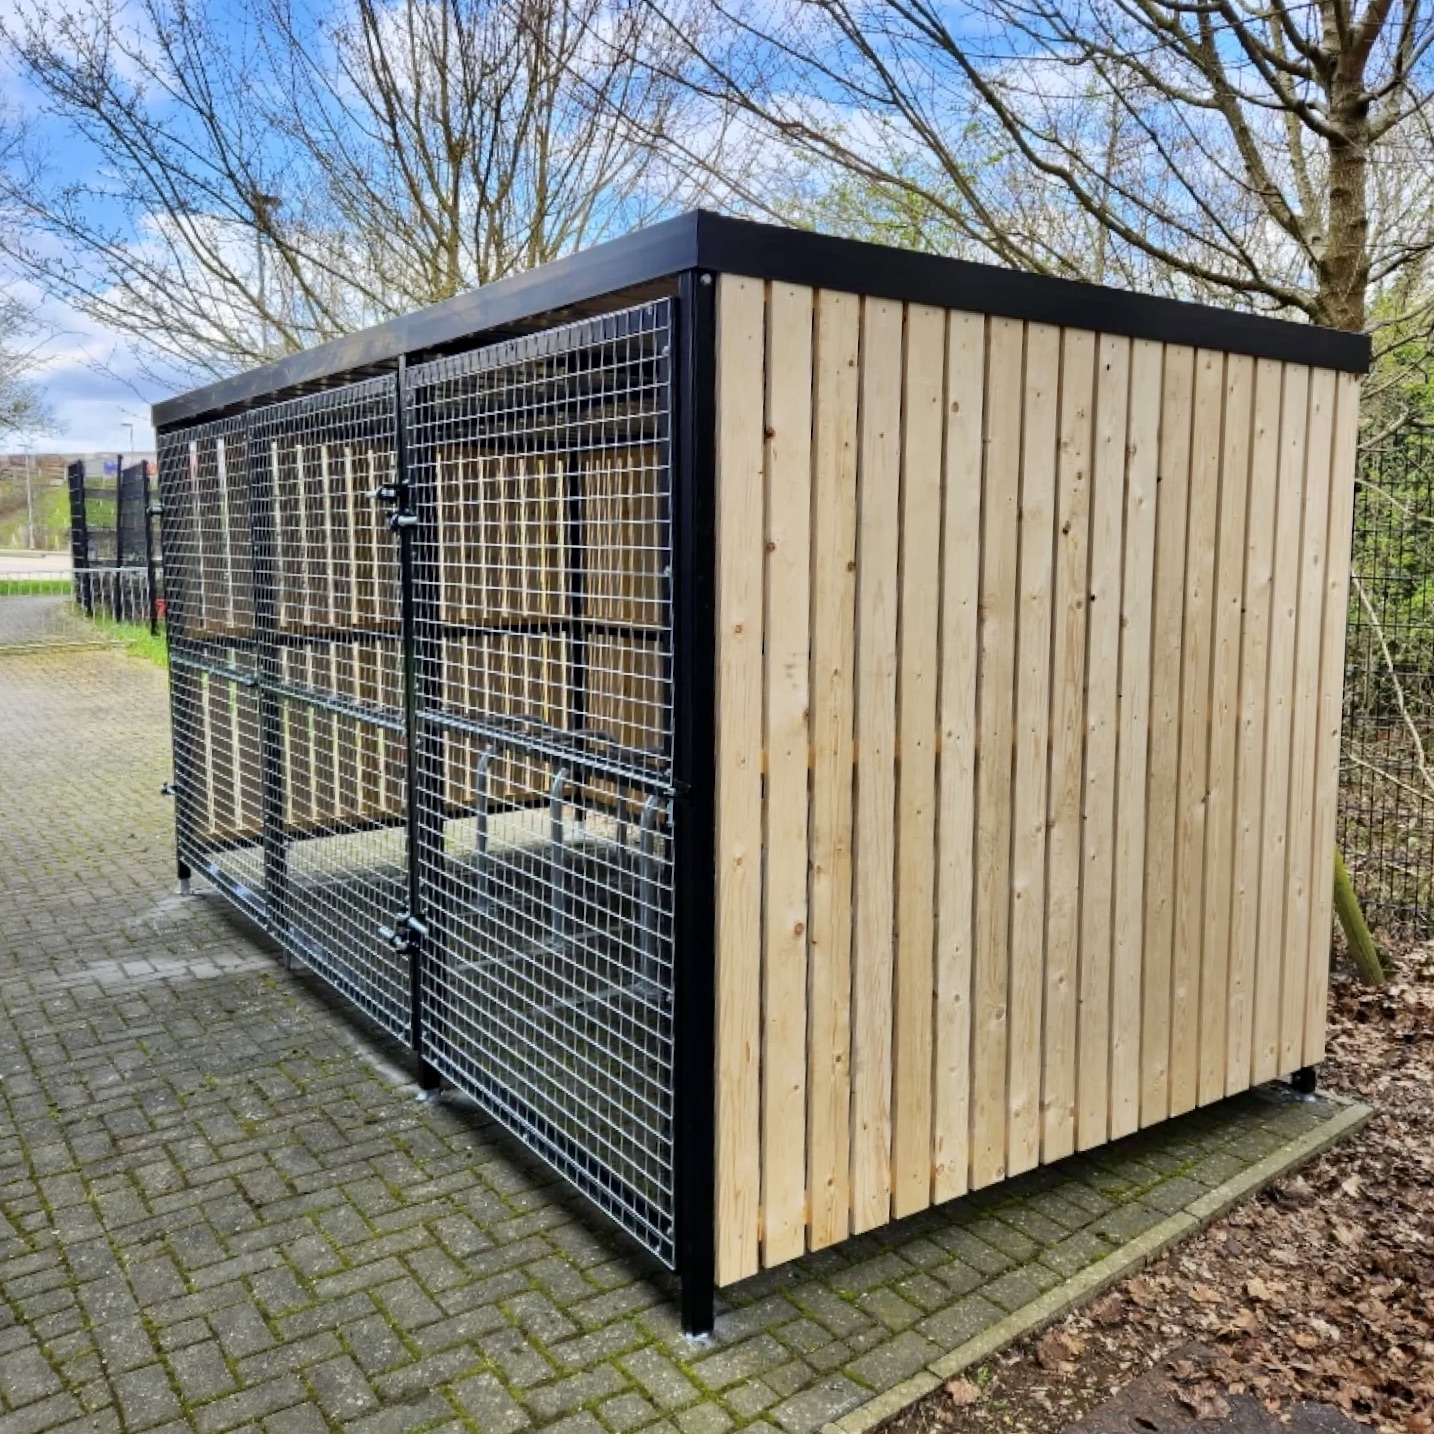 wooden bike shelter outside with mesh fencing